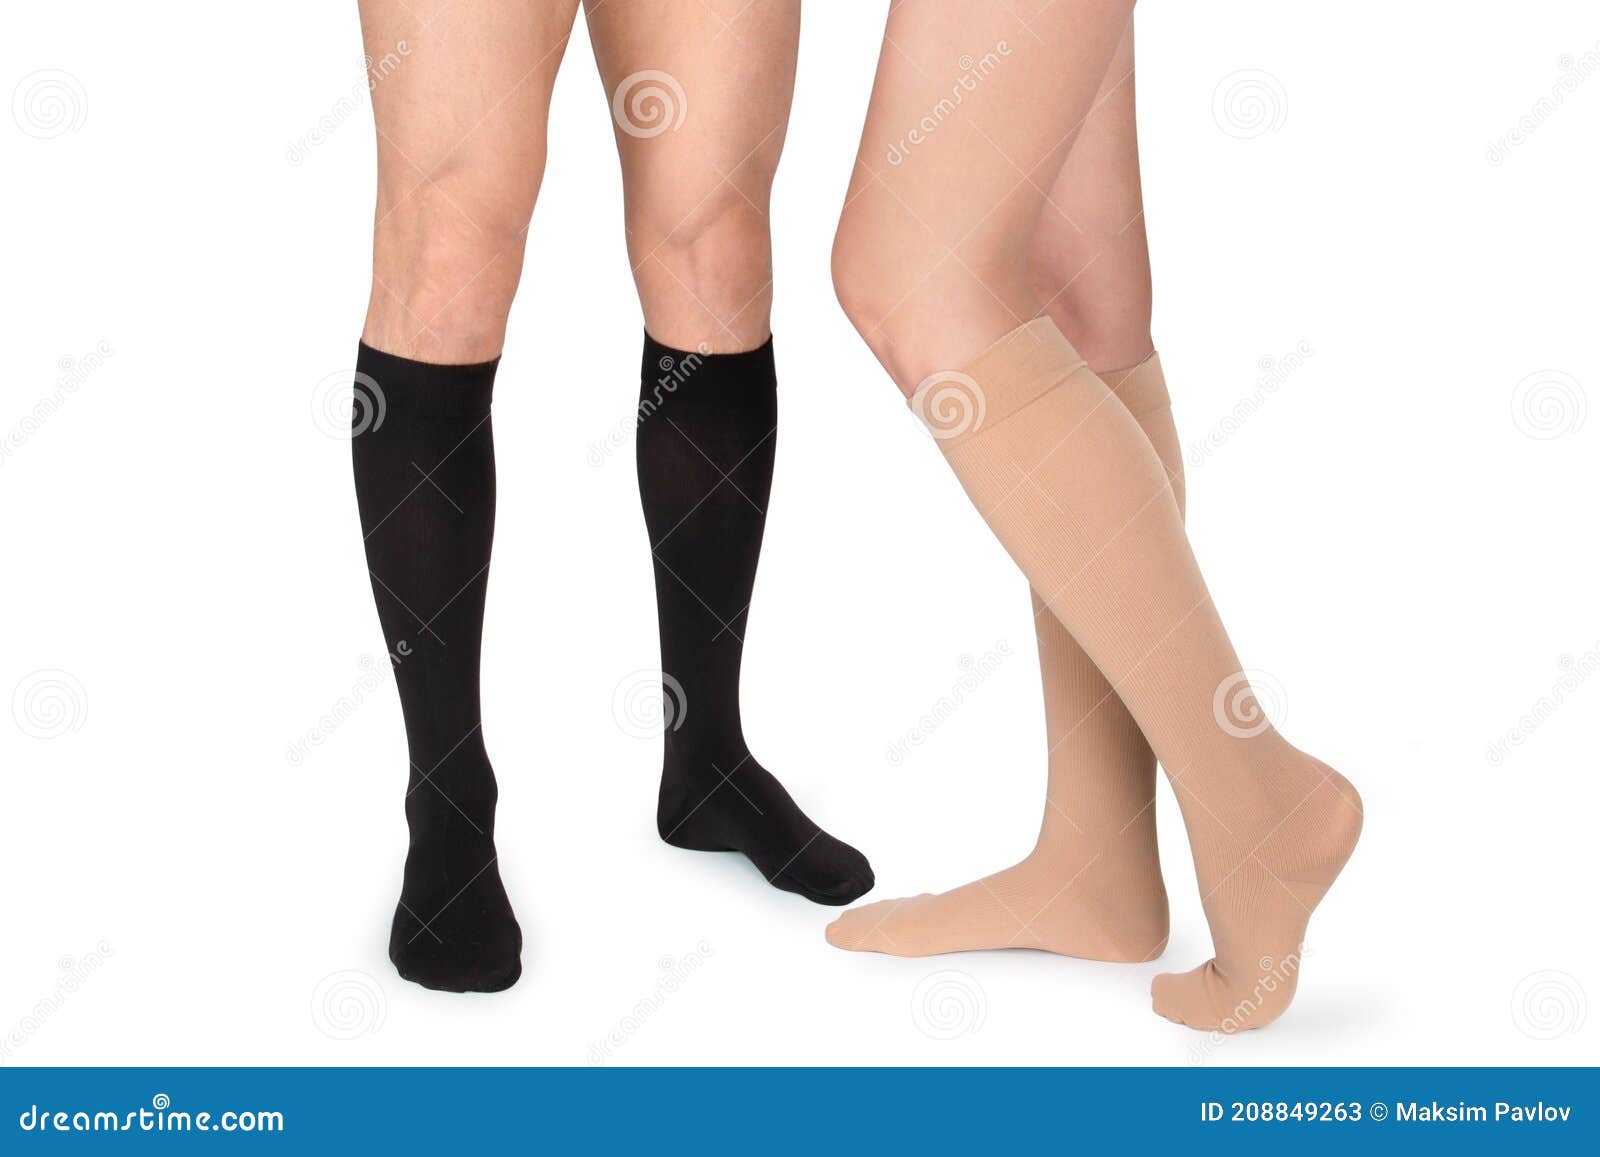 Compression Hosiery. Medical Compression Stockings and Tights for Varicose  Veins and Venouse Therapy. Socks for Man and Women Stock Image - Image of  knee, medicine: 208849263